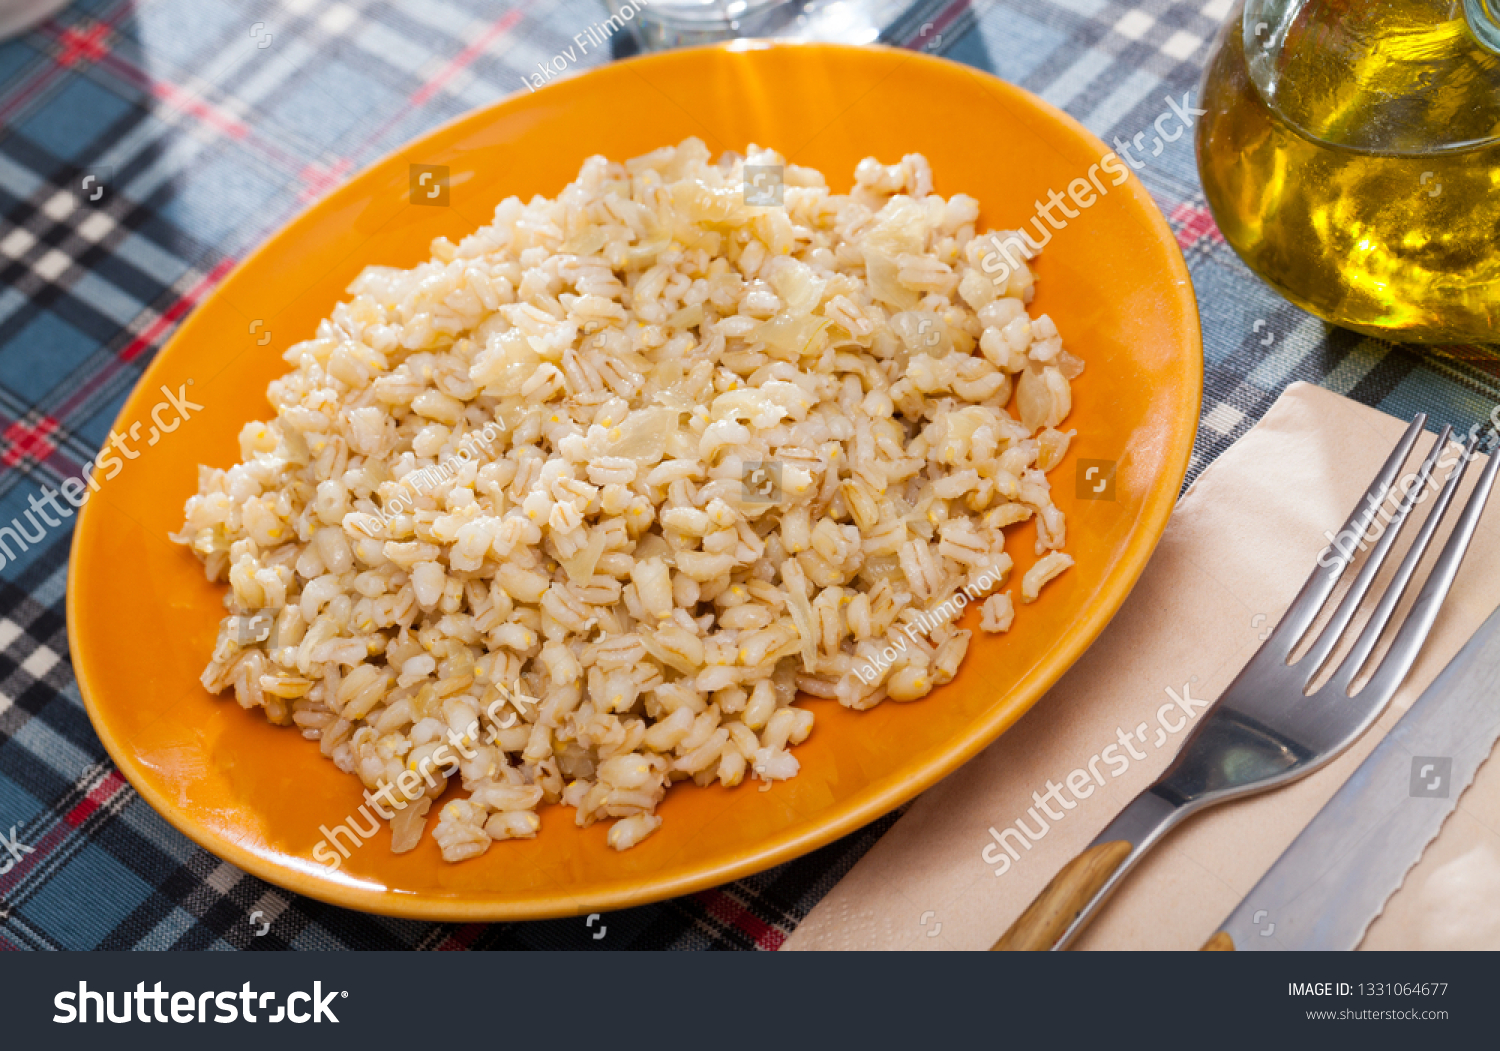 Download Boiled Pearl Barley Served On Yellow Stock Photo Edit Now 1331064677 PSD Mockup Templates